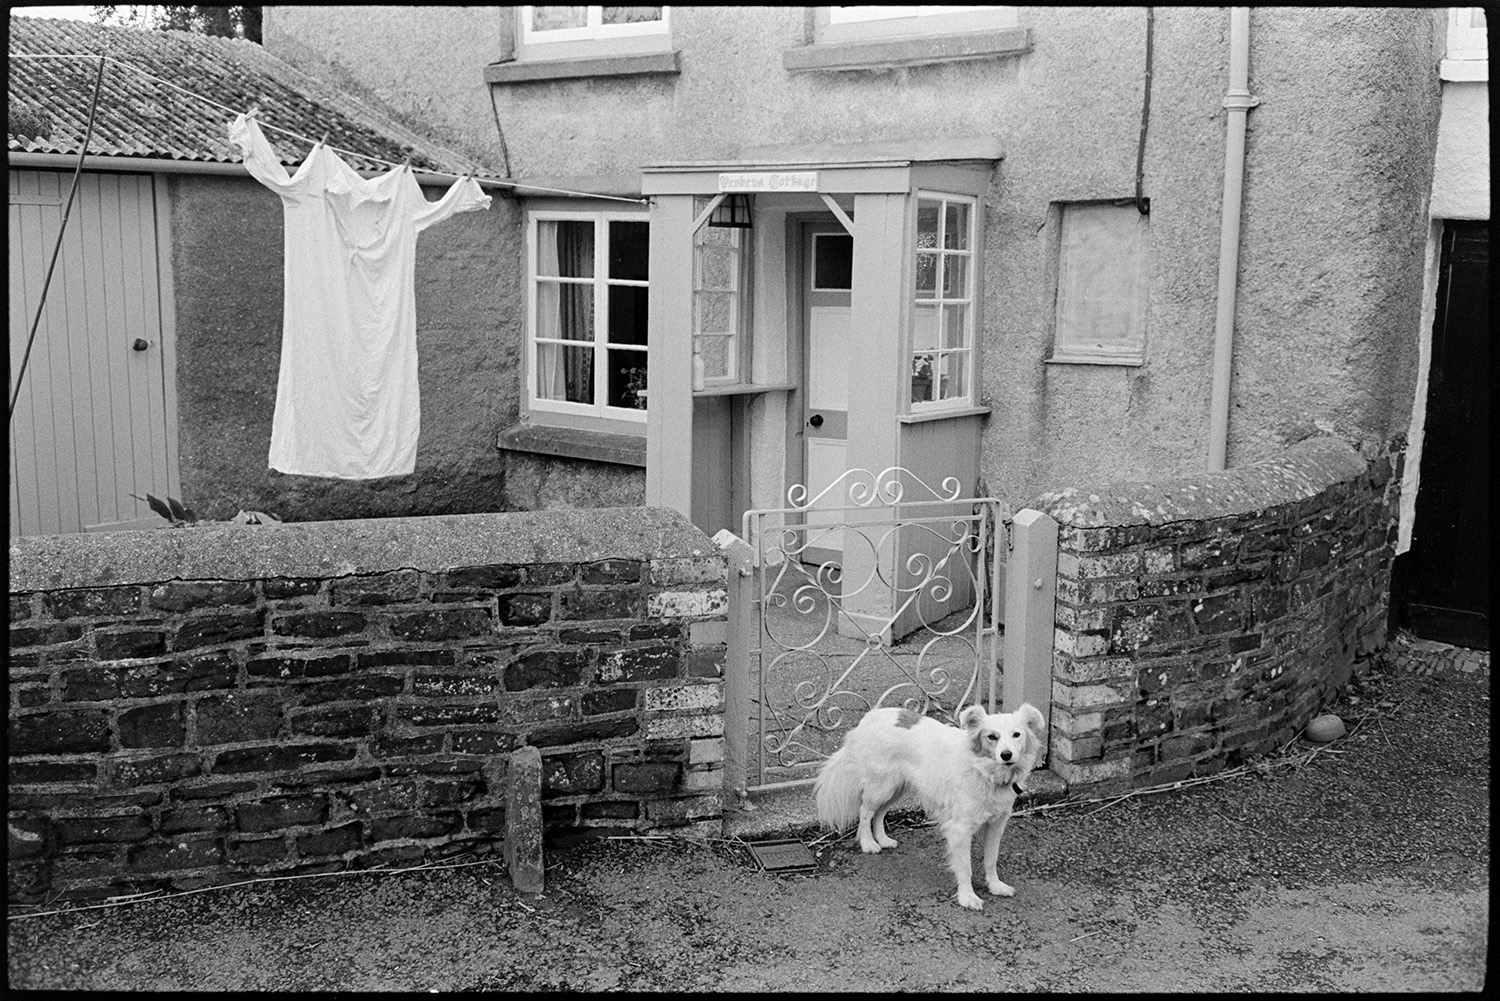 Small house with clothes on the washing line, nightshirt ? Dog, front door with porch. 
[A house in North Street, Dolton with a porch and a washing line with a shirt hung up to dry. A dog is stood by the gate to the house.]